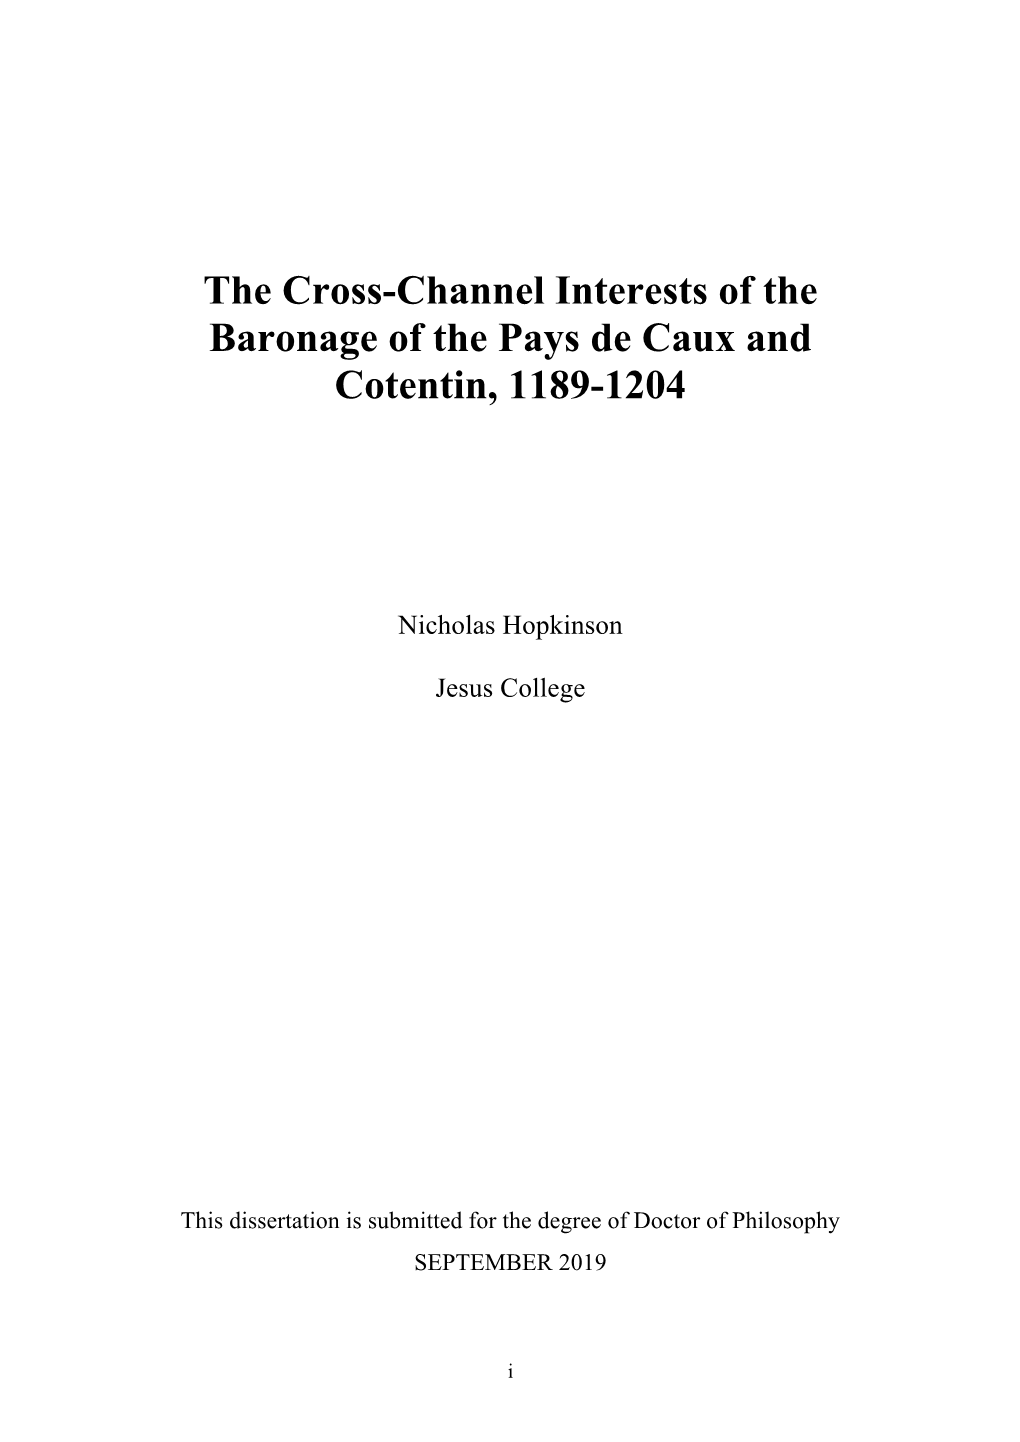 The Cross-Channel Interests of the Baronage of the Pays De Caux and Cotentin, 1189-1204